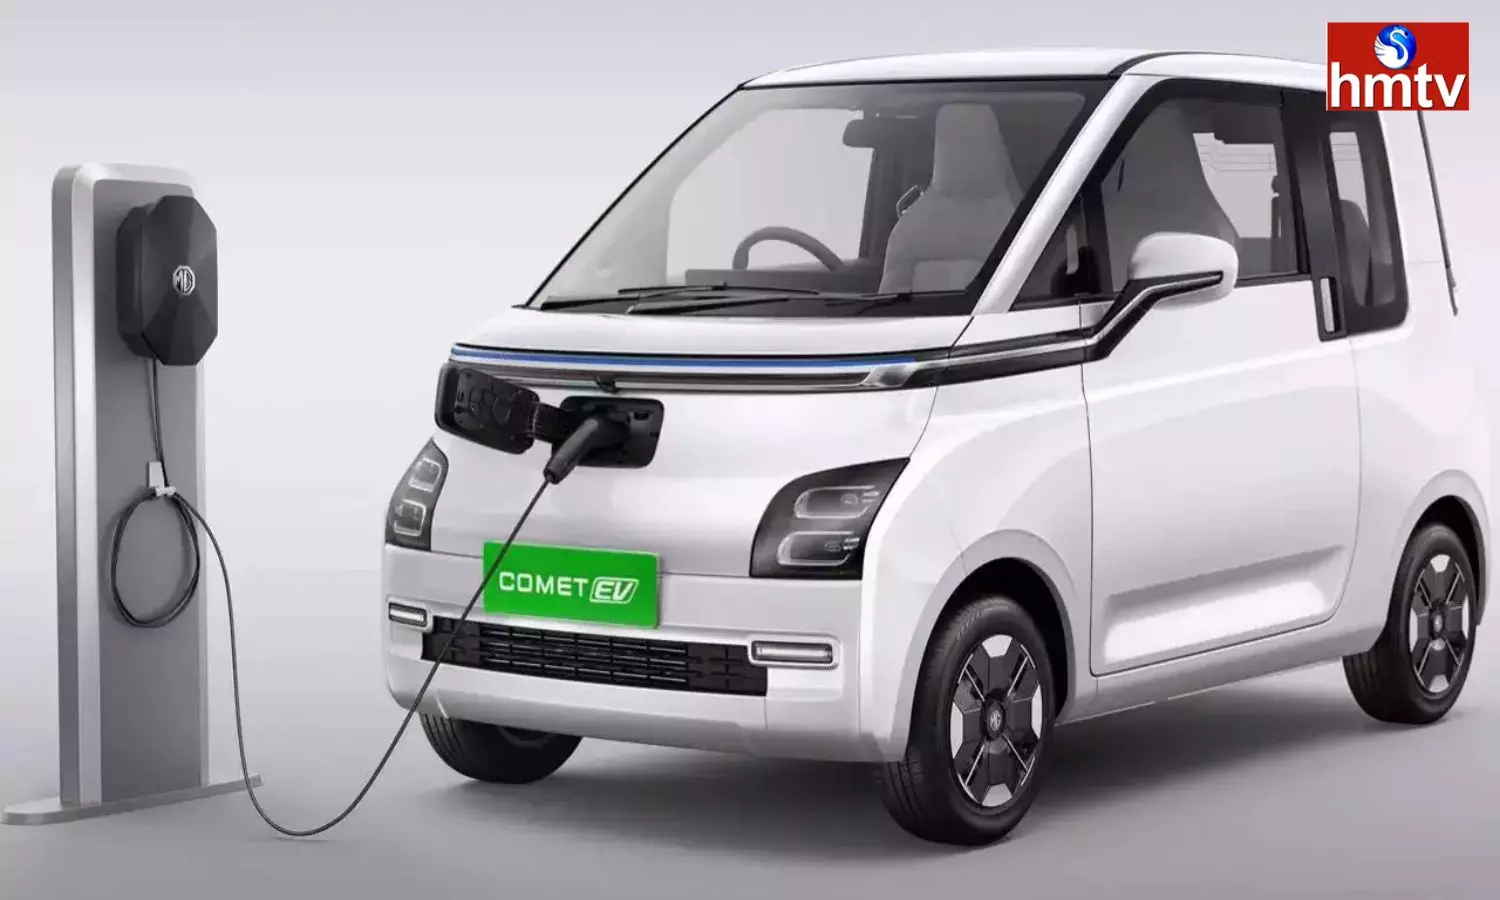 mg comet ev most affordable electric car in India check price and features